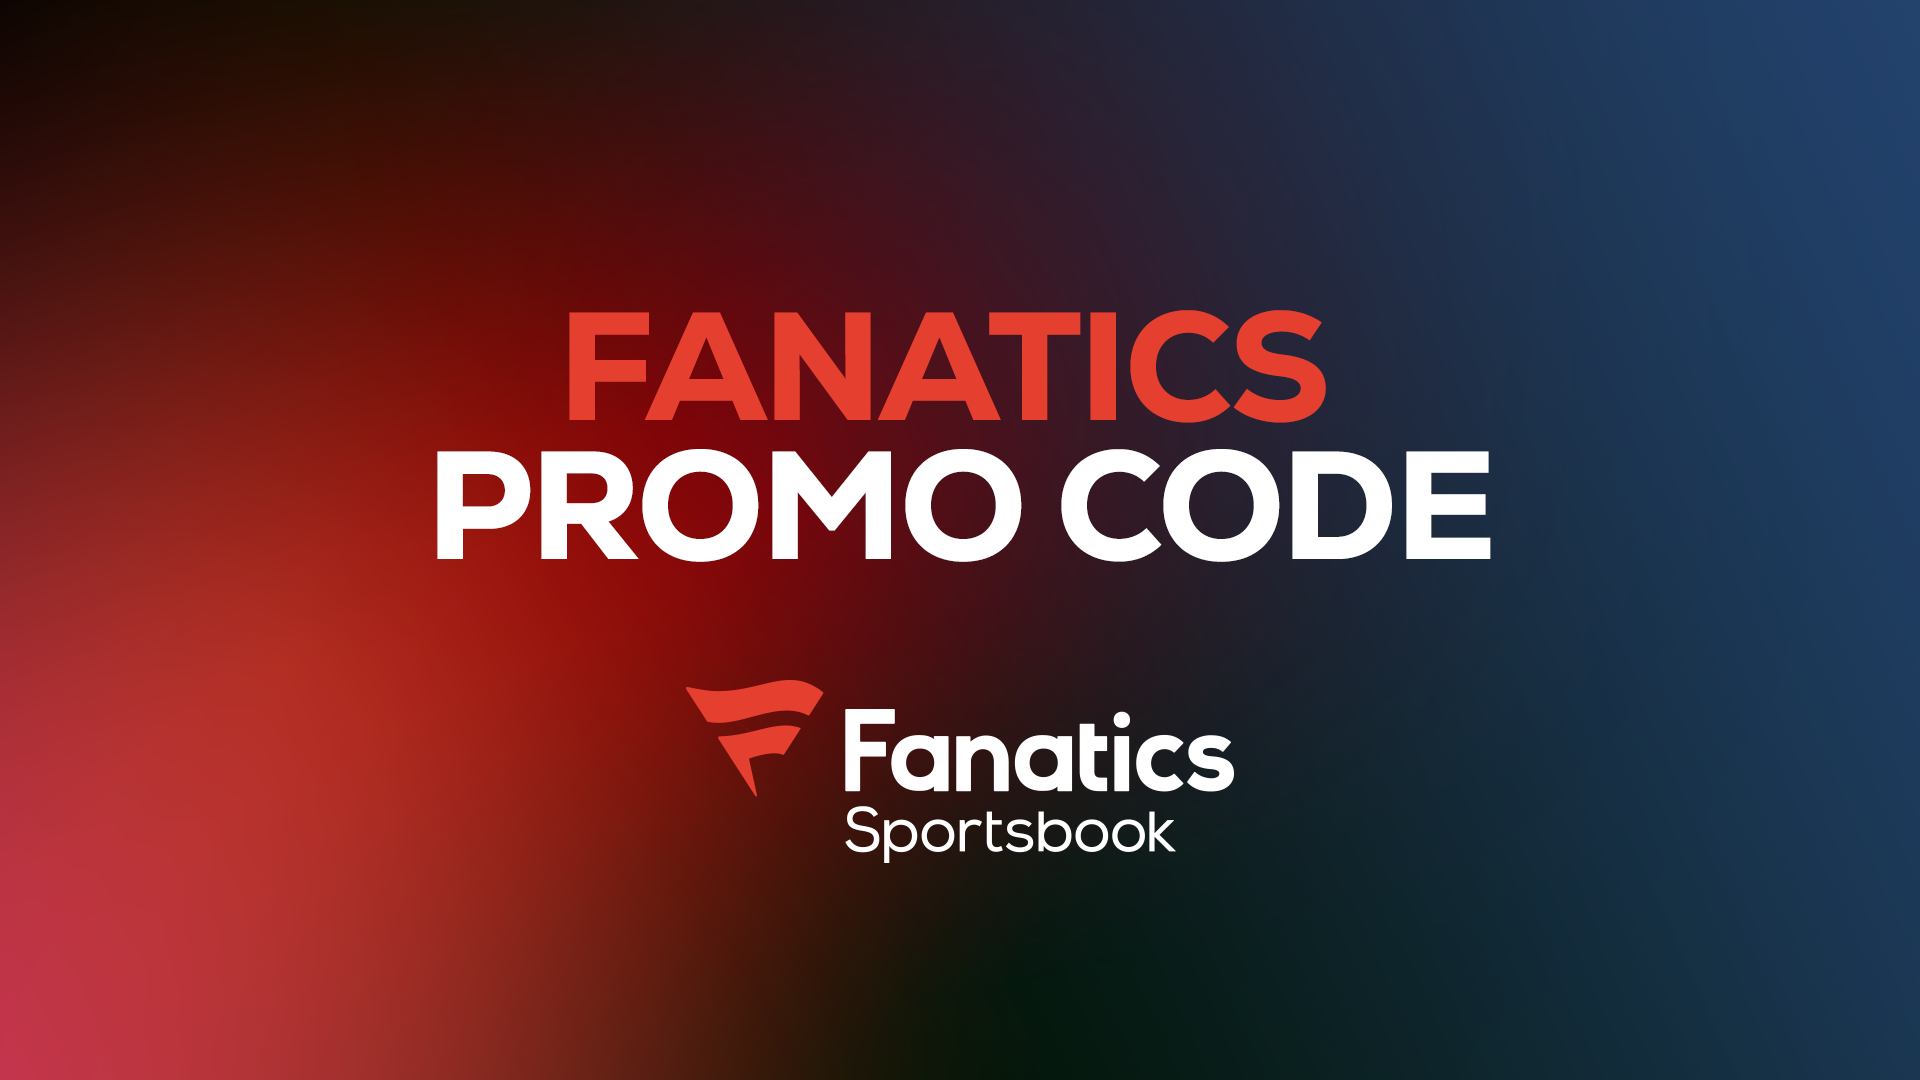 Fanatics Sportsbook promo: Get K in bonus bets for the NBA Play-In games